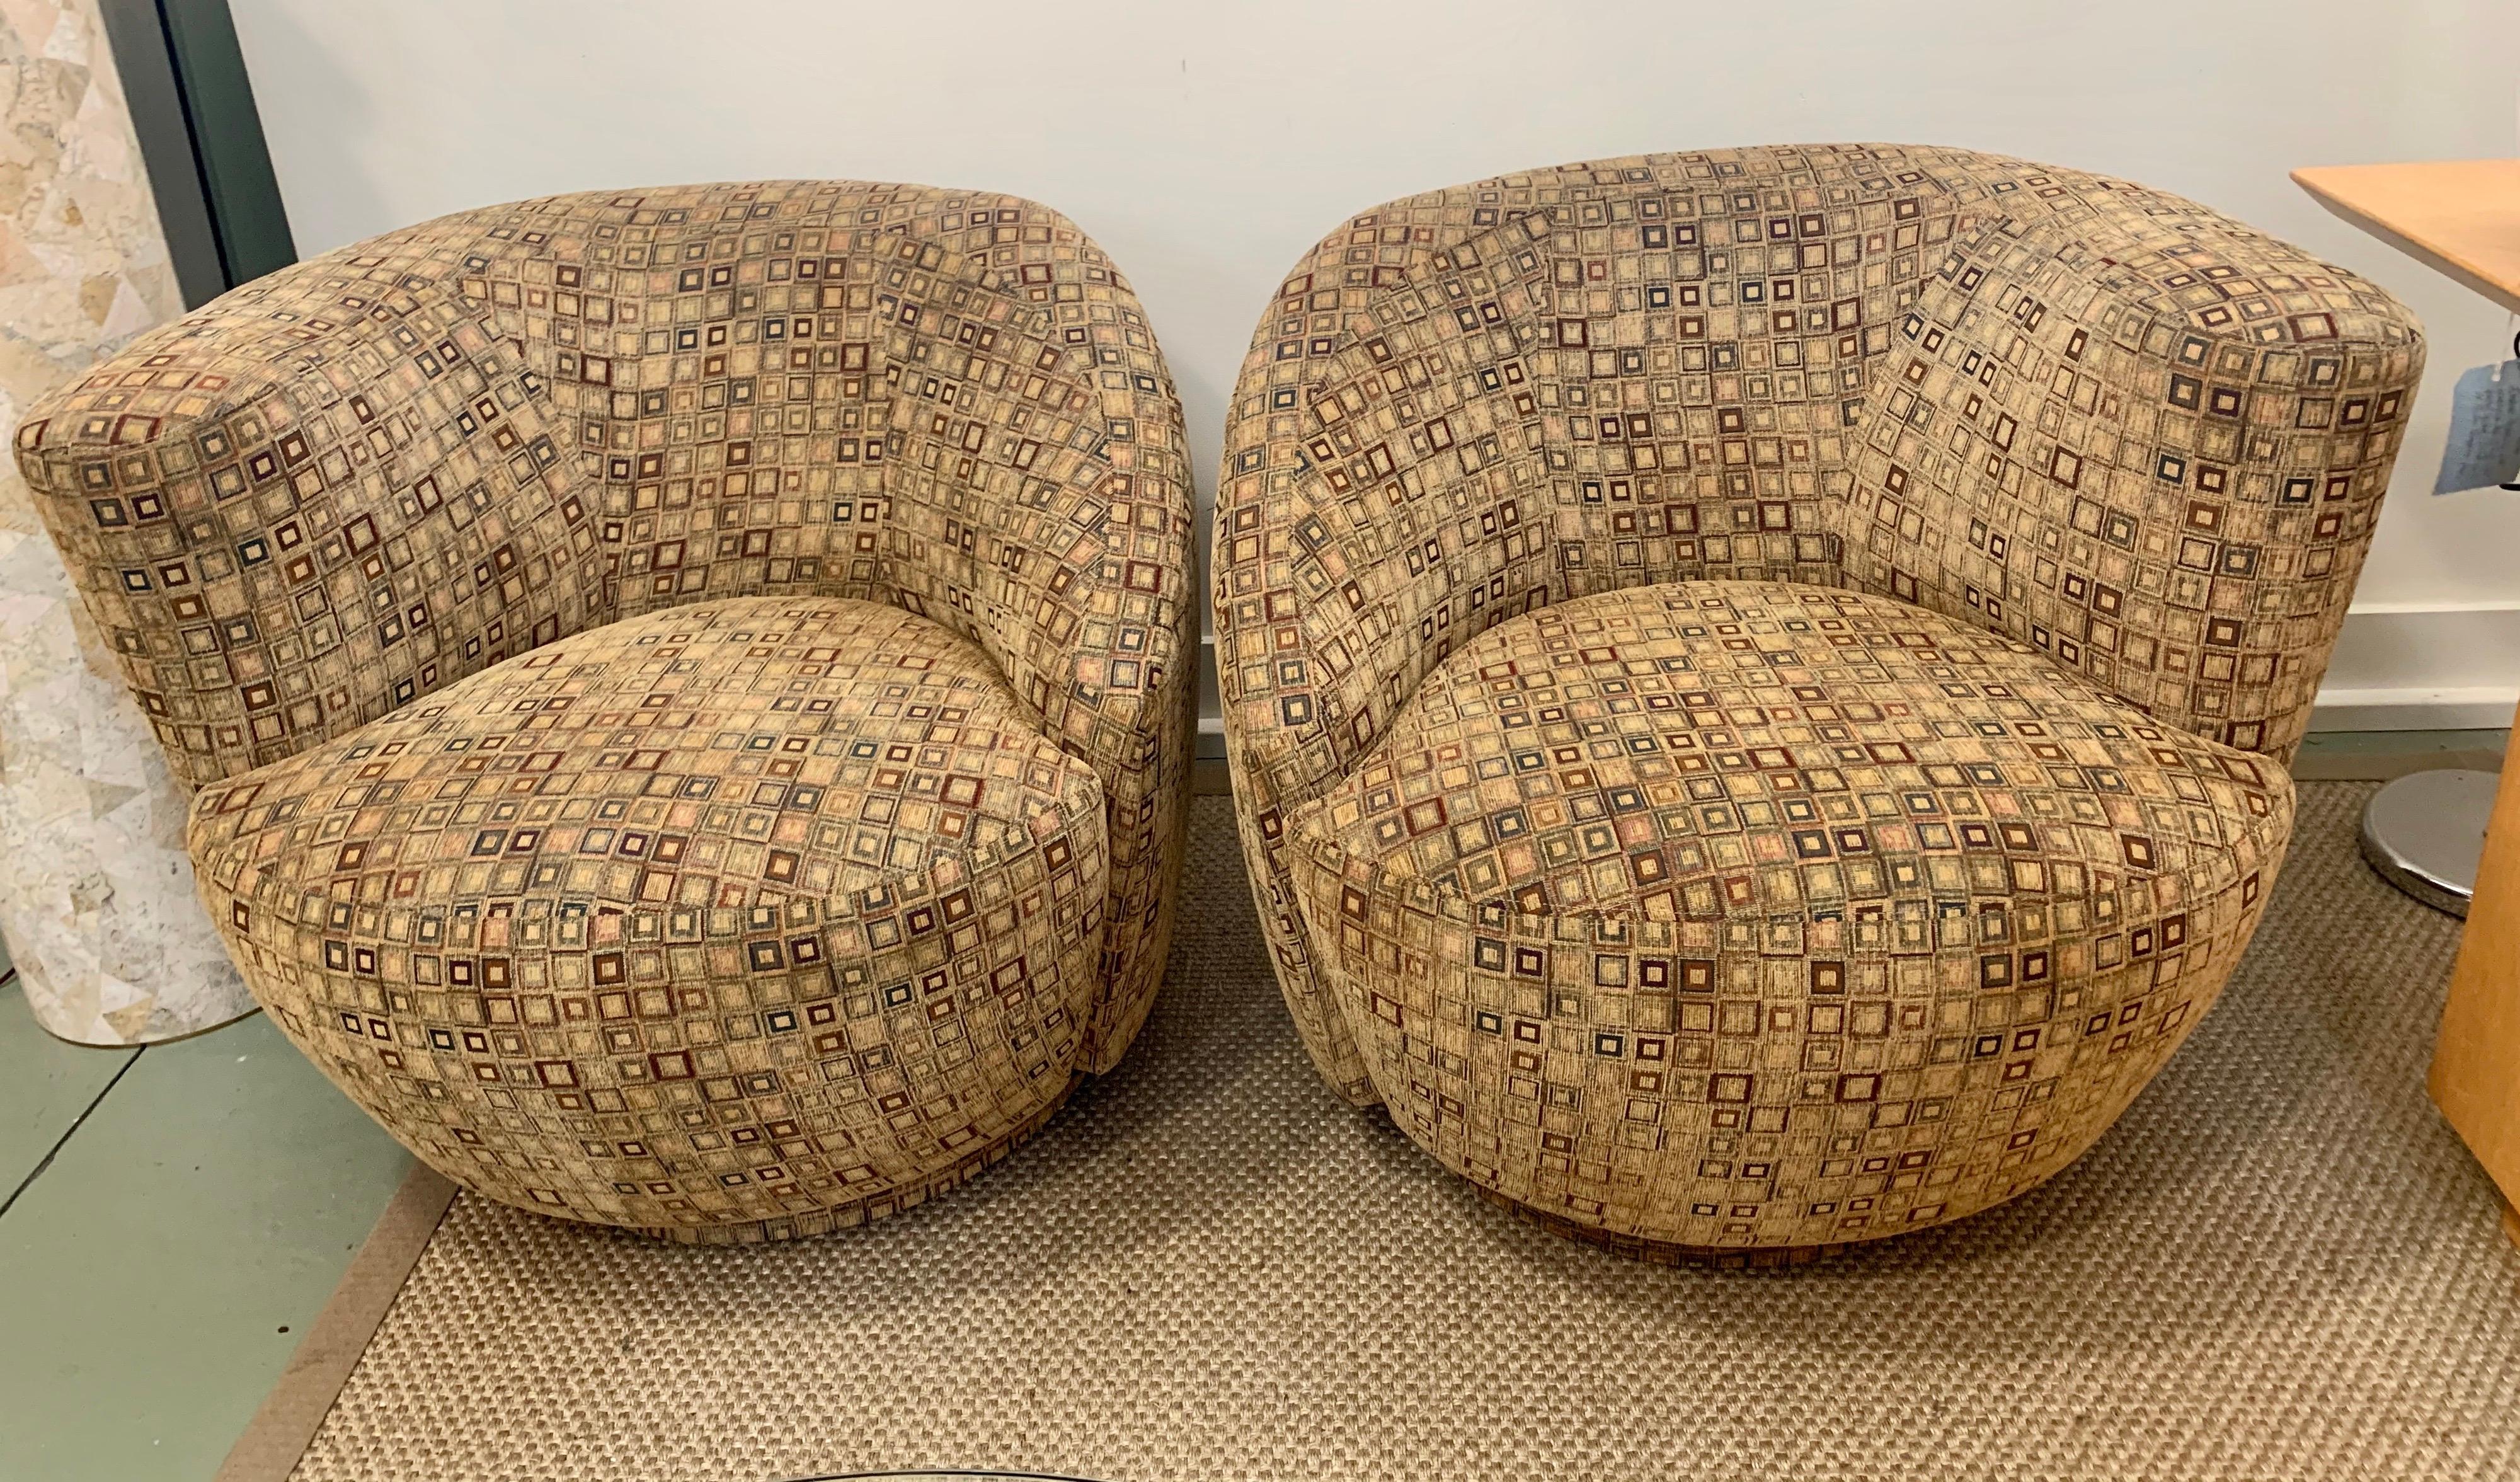 Magnificent pair of Kagan Nautilus swivel chairs. The fabric is an off beige/brown with geomtetric design and still in good condition. The ultimate in comfort and design and one of the true iconic mid century pieces today. Now, more than ever, home